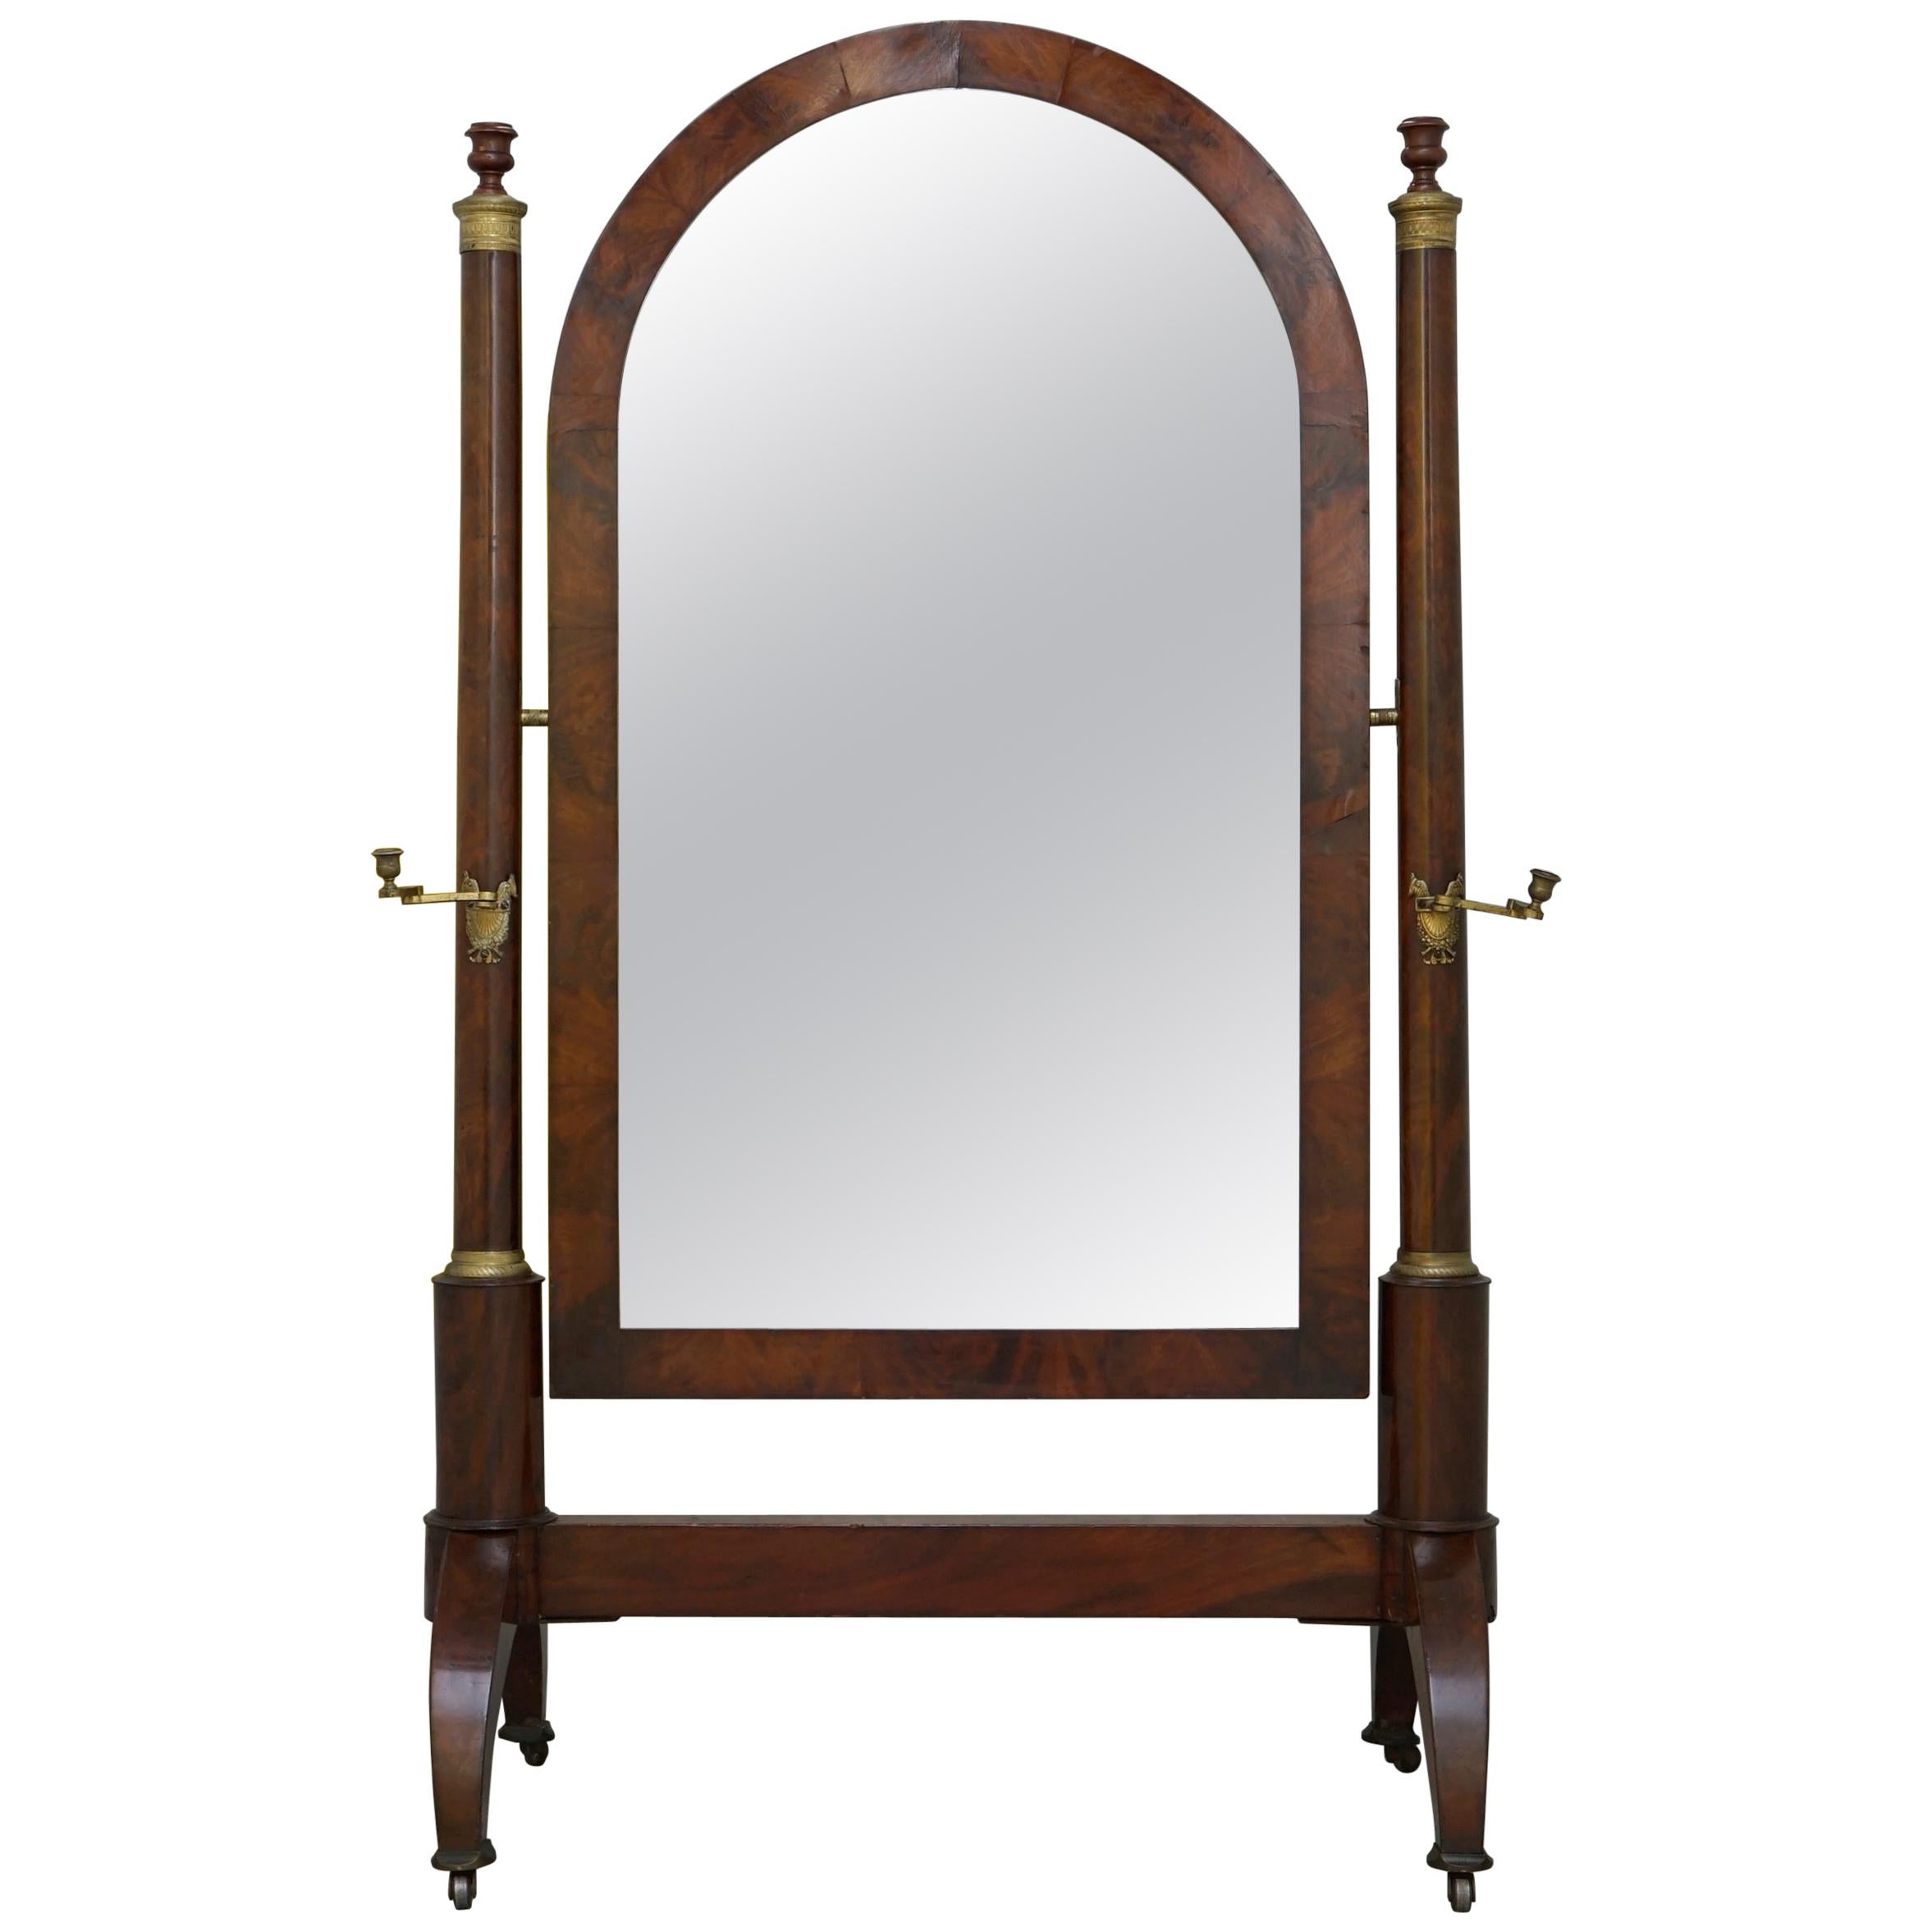 French Empire Hardwood and Gilt Metal with Candles Cheval Mirror, circa 1810 For Sale